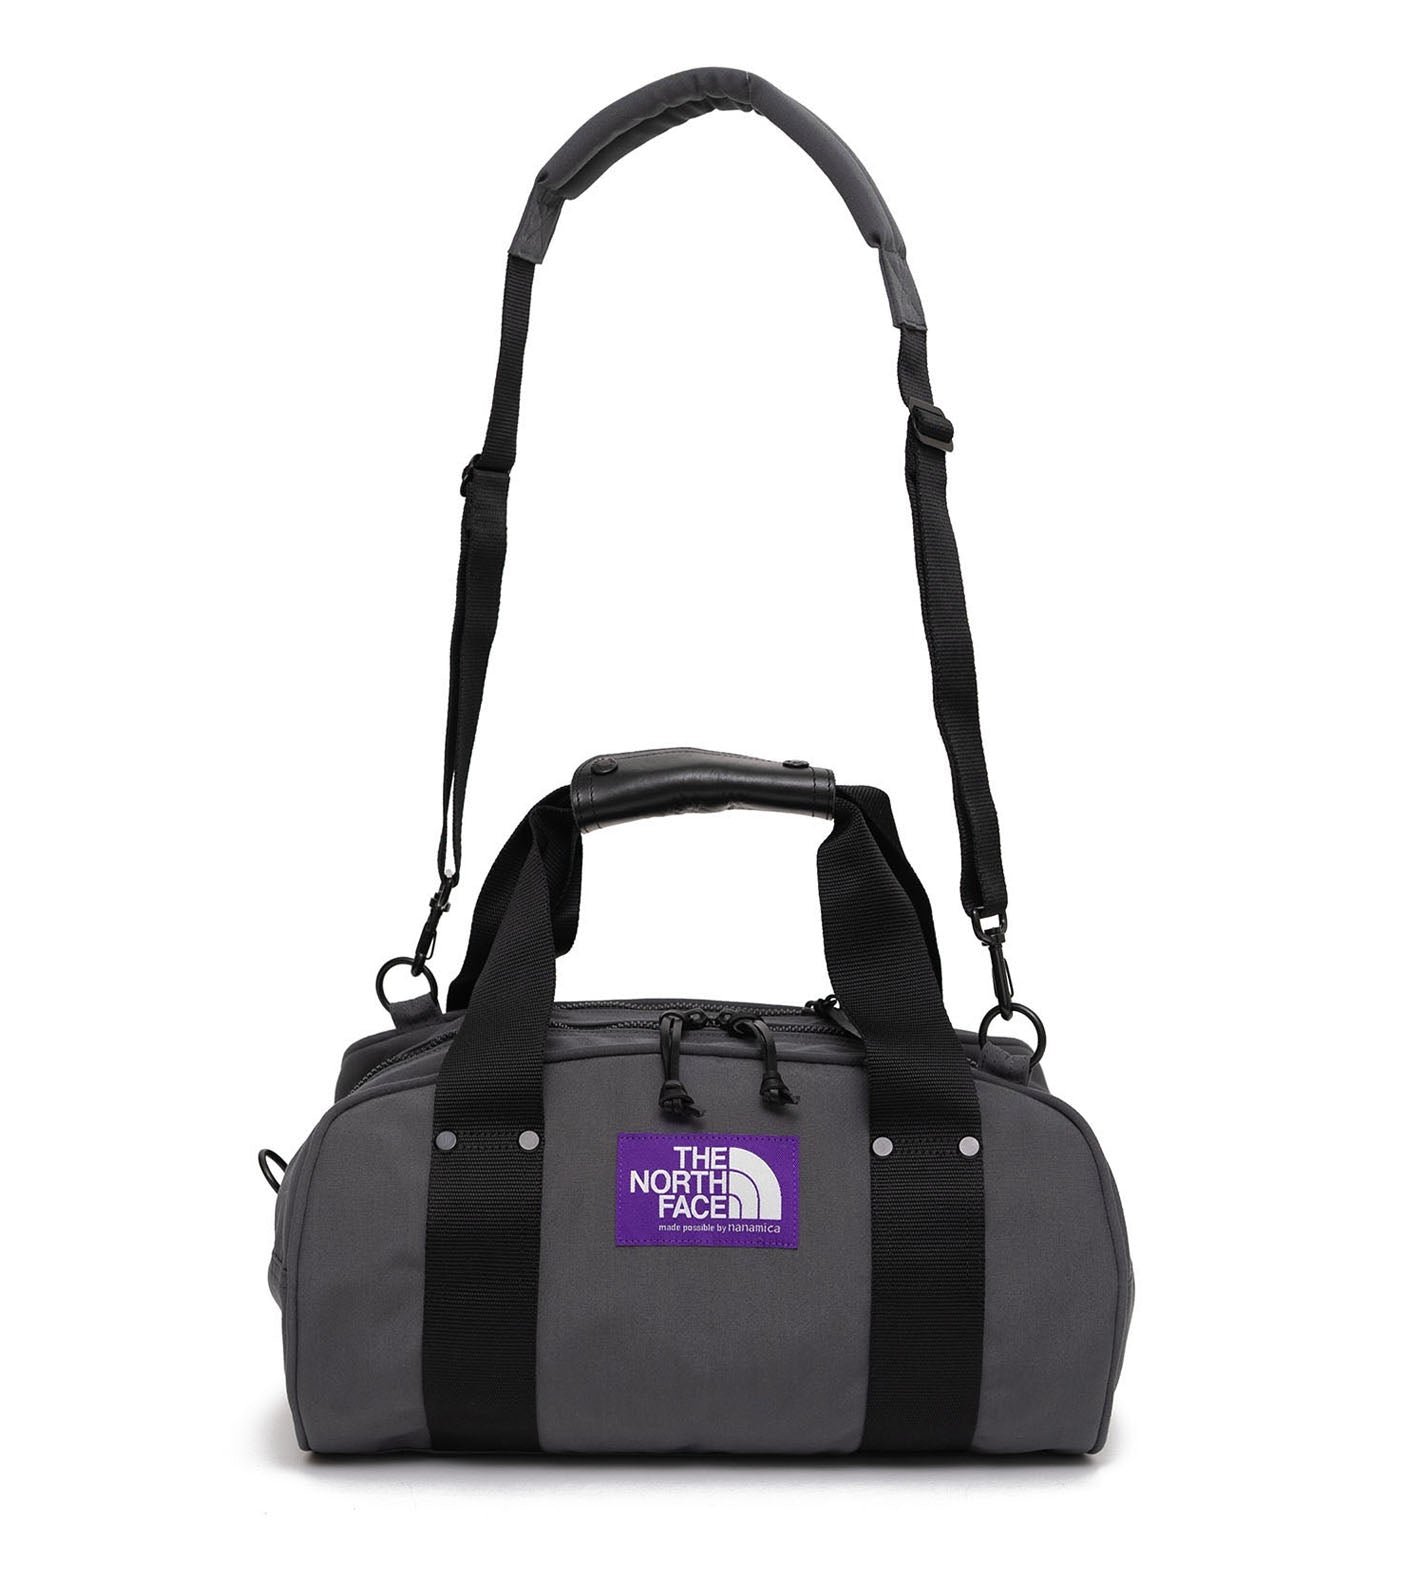 THE NORTH FACE PURPLE LABEL Field Duffle Bag – unexpected store